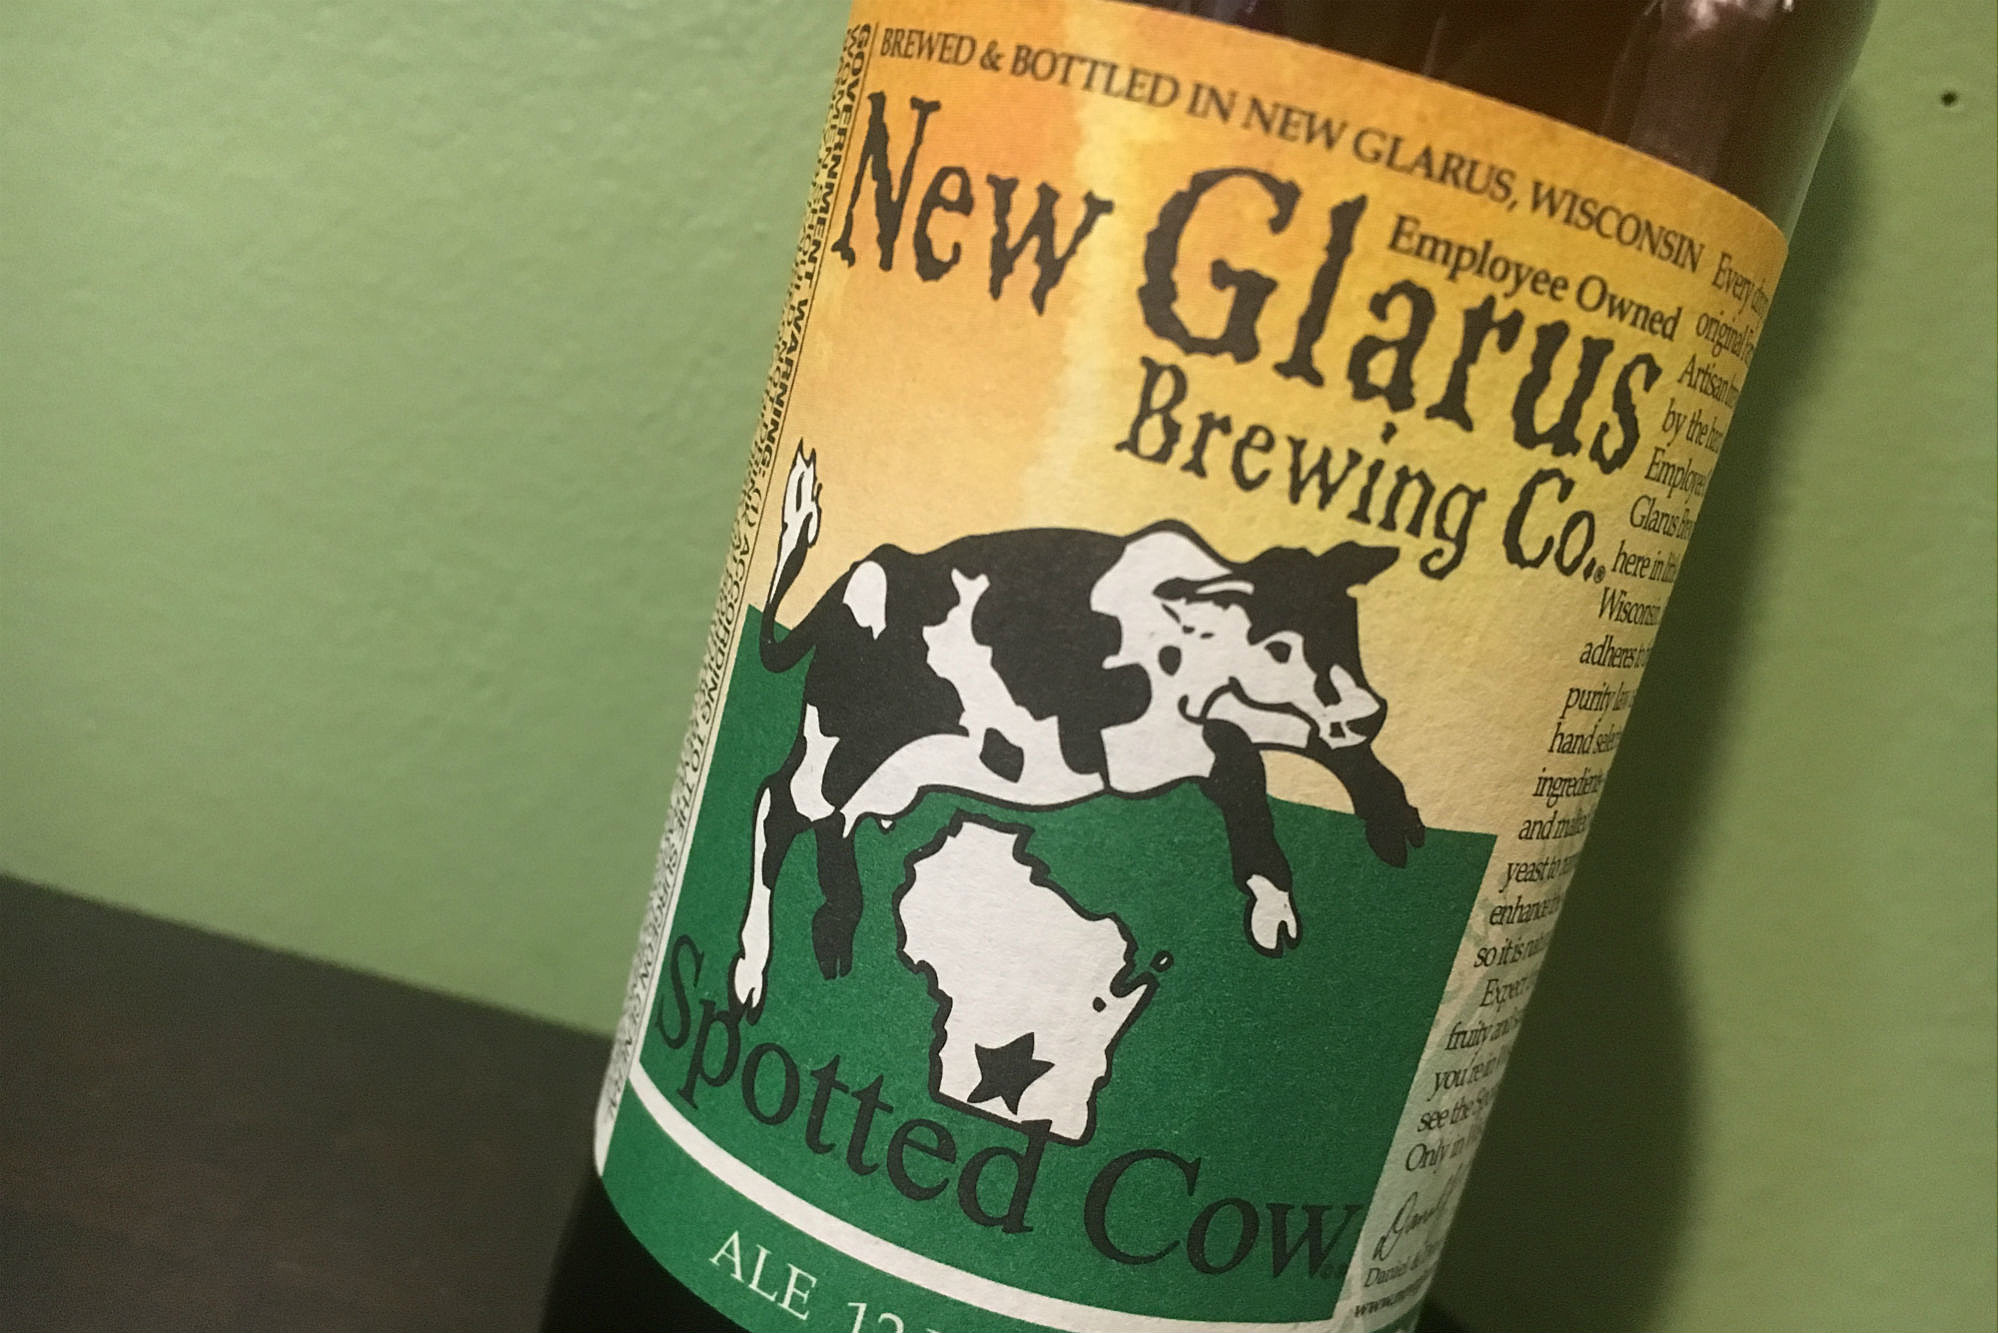 spotted cow beer t shirt